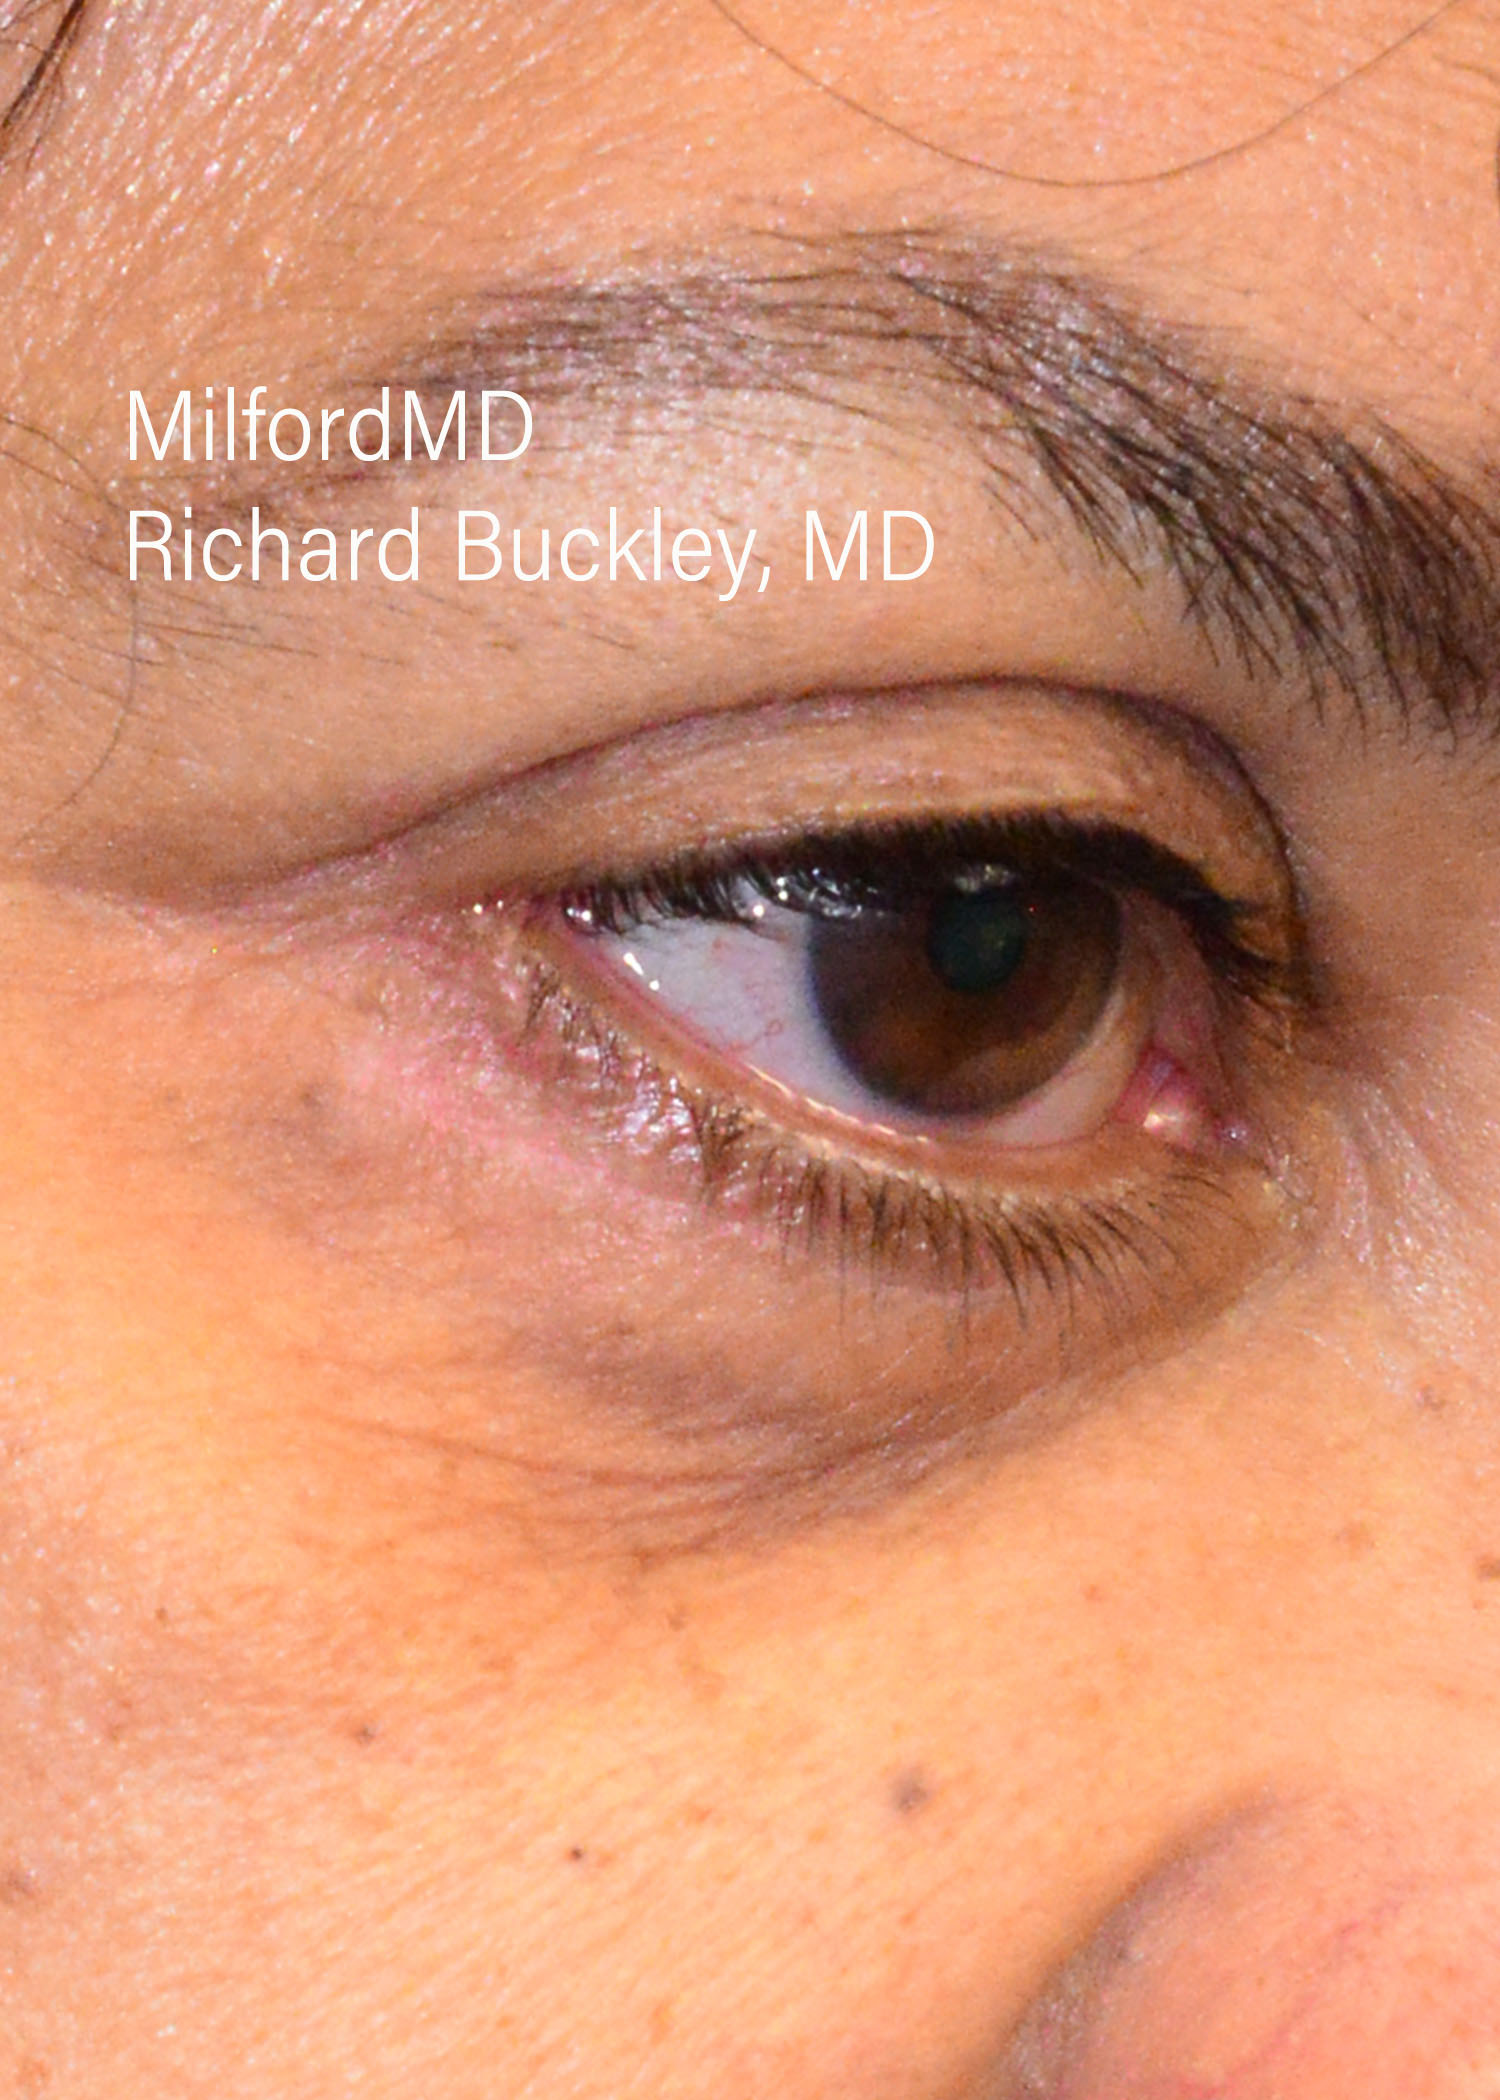 Lower Blepharoplasty Before and After Photos,Lower Blepharoplasty Before & After Photos,Lower Blepharoplasty Before and After Gallery,Lower Eyelid Surgery Before & After Photos,Lower Blepharoplasty Before & After, Cosmetic Removals